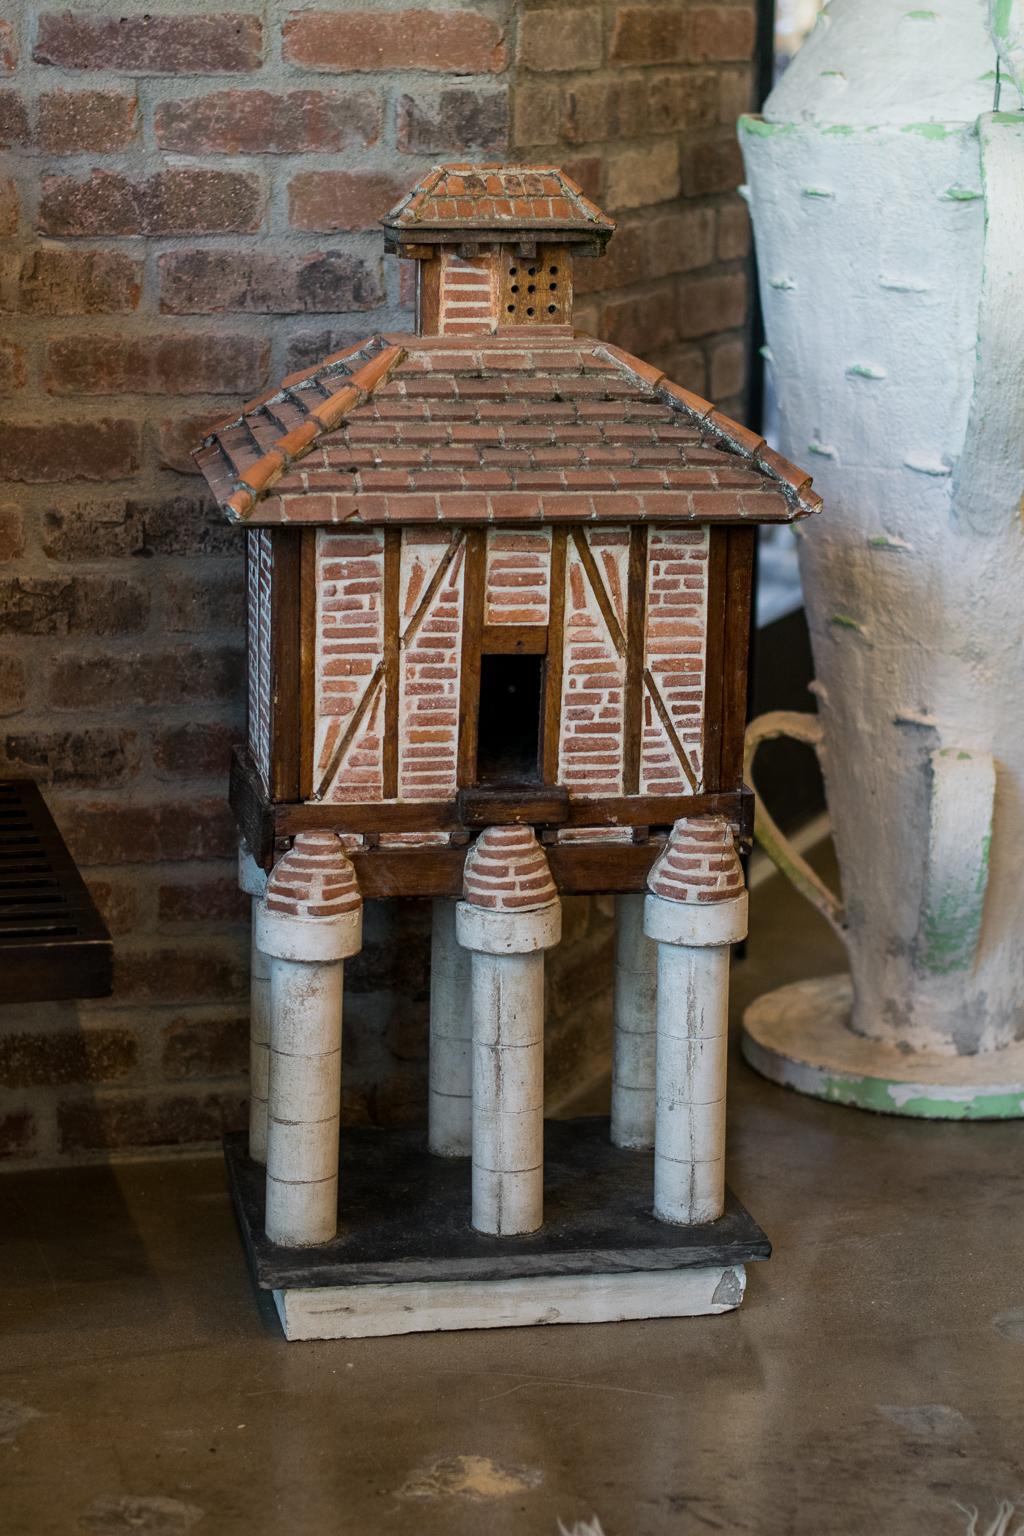 Charming handmade birdhouse fashioned from remnant terracotta tile, wood and mortar into a well-constructed architectural element. Includes clay tile roof and masonry columns with slate and masonry base. Captivating as an interior sculptural